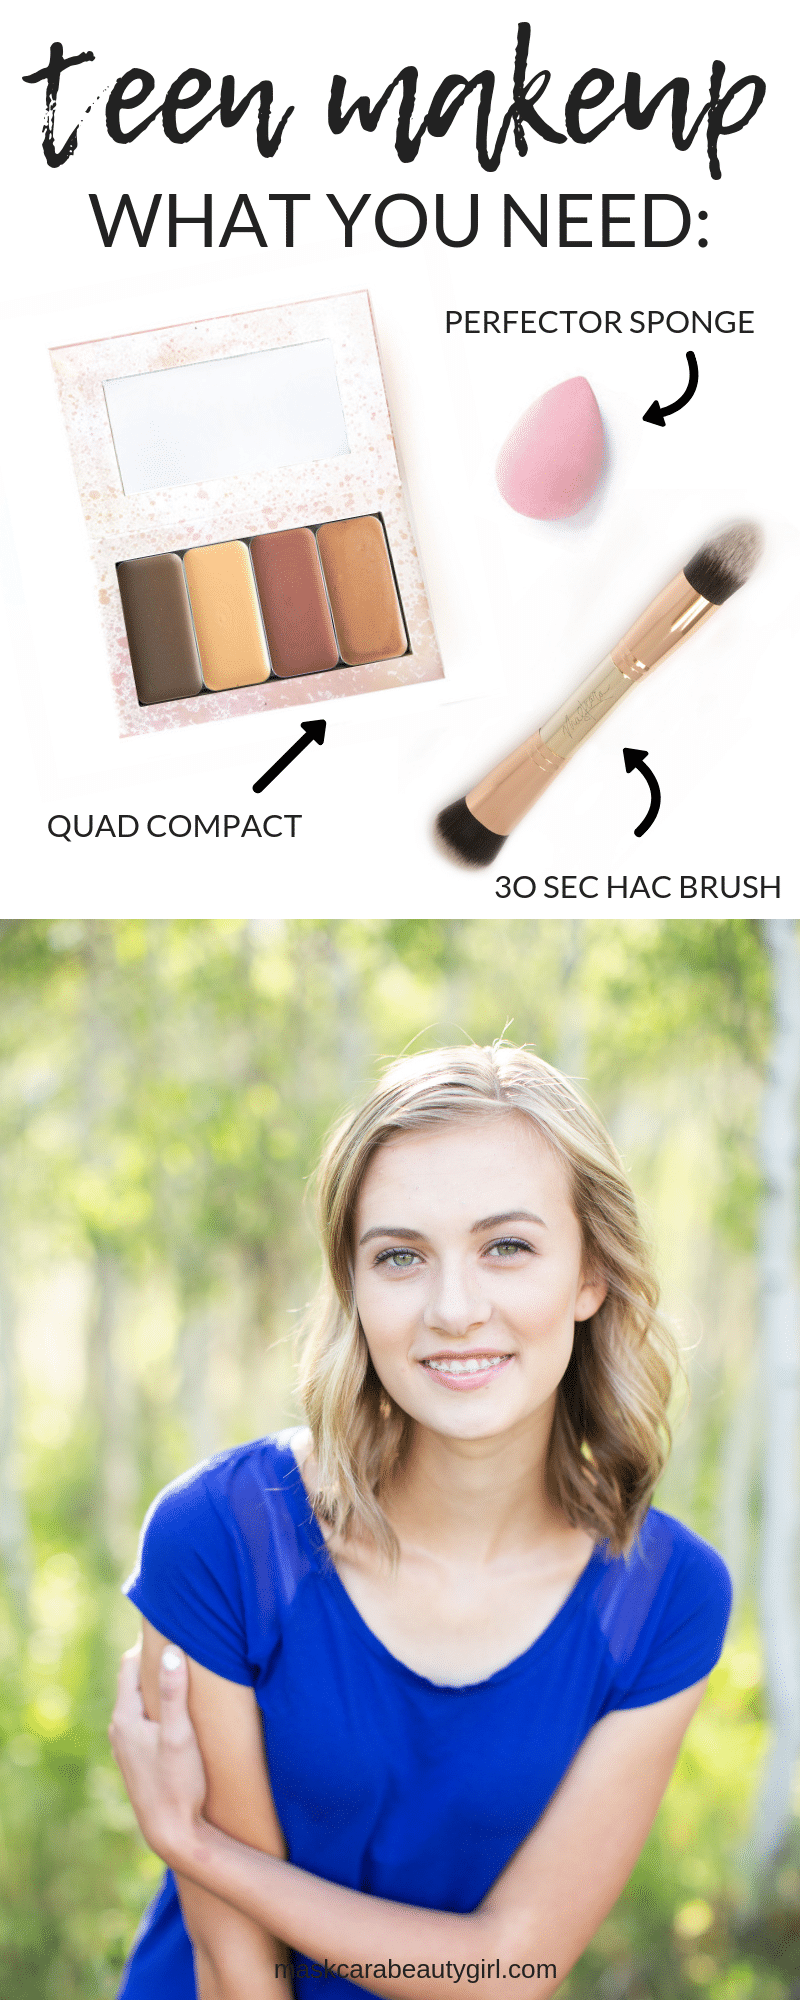 The Perfect Makeup for Teens!